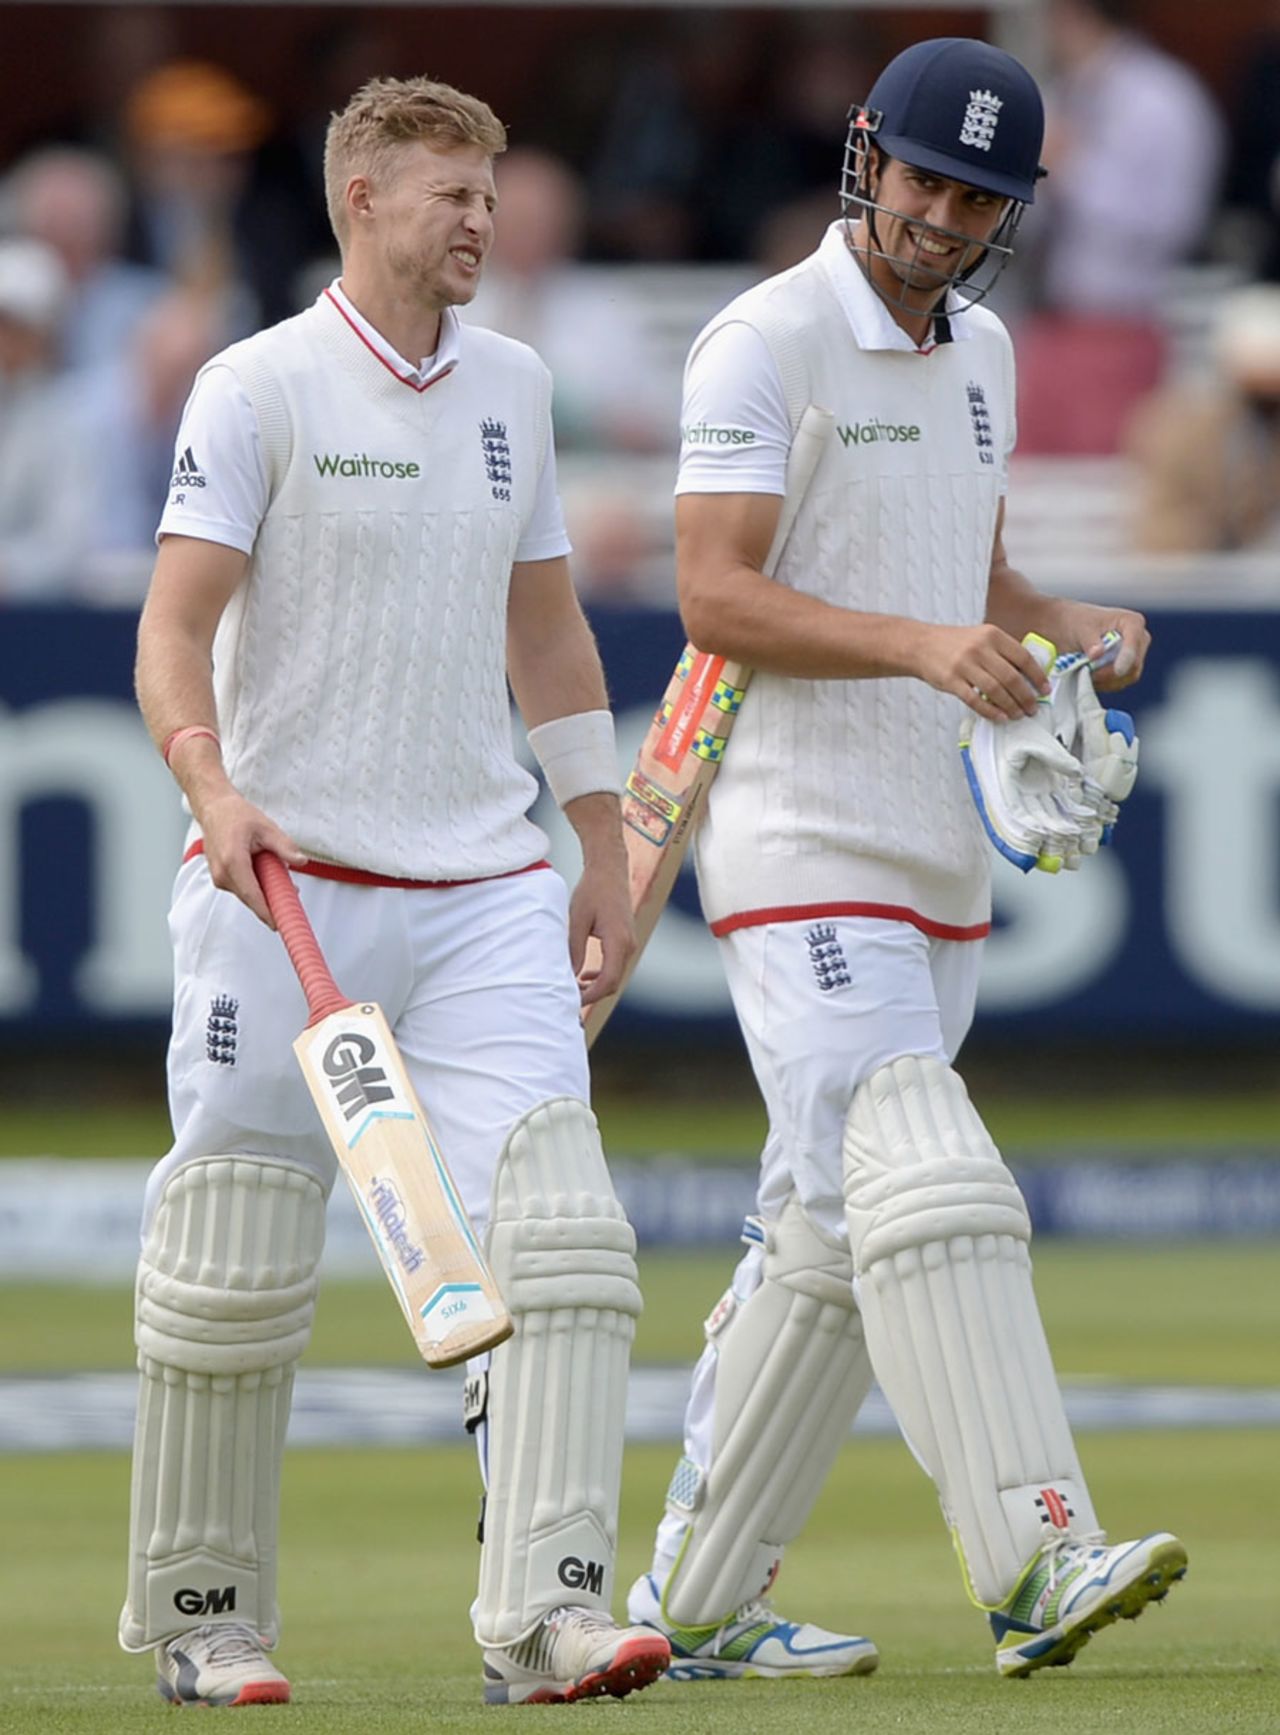 Joe Root and Alastair Cook made a hundred together before lunch, England v New Zealand, 1st Investec Test, Lord's, 4th day, May 24, 2015